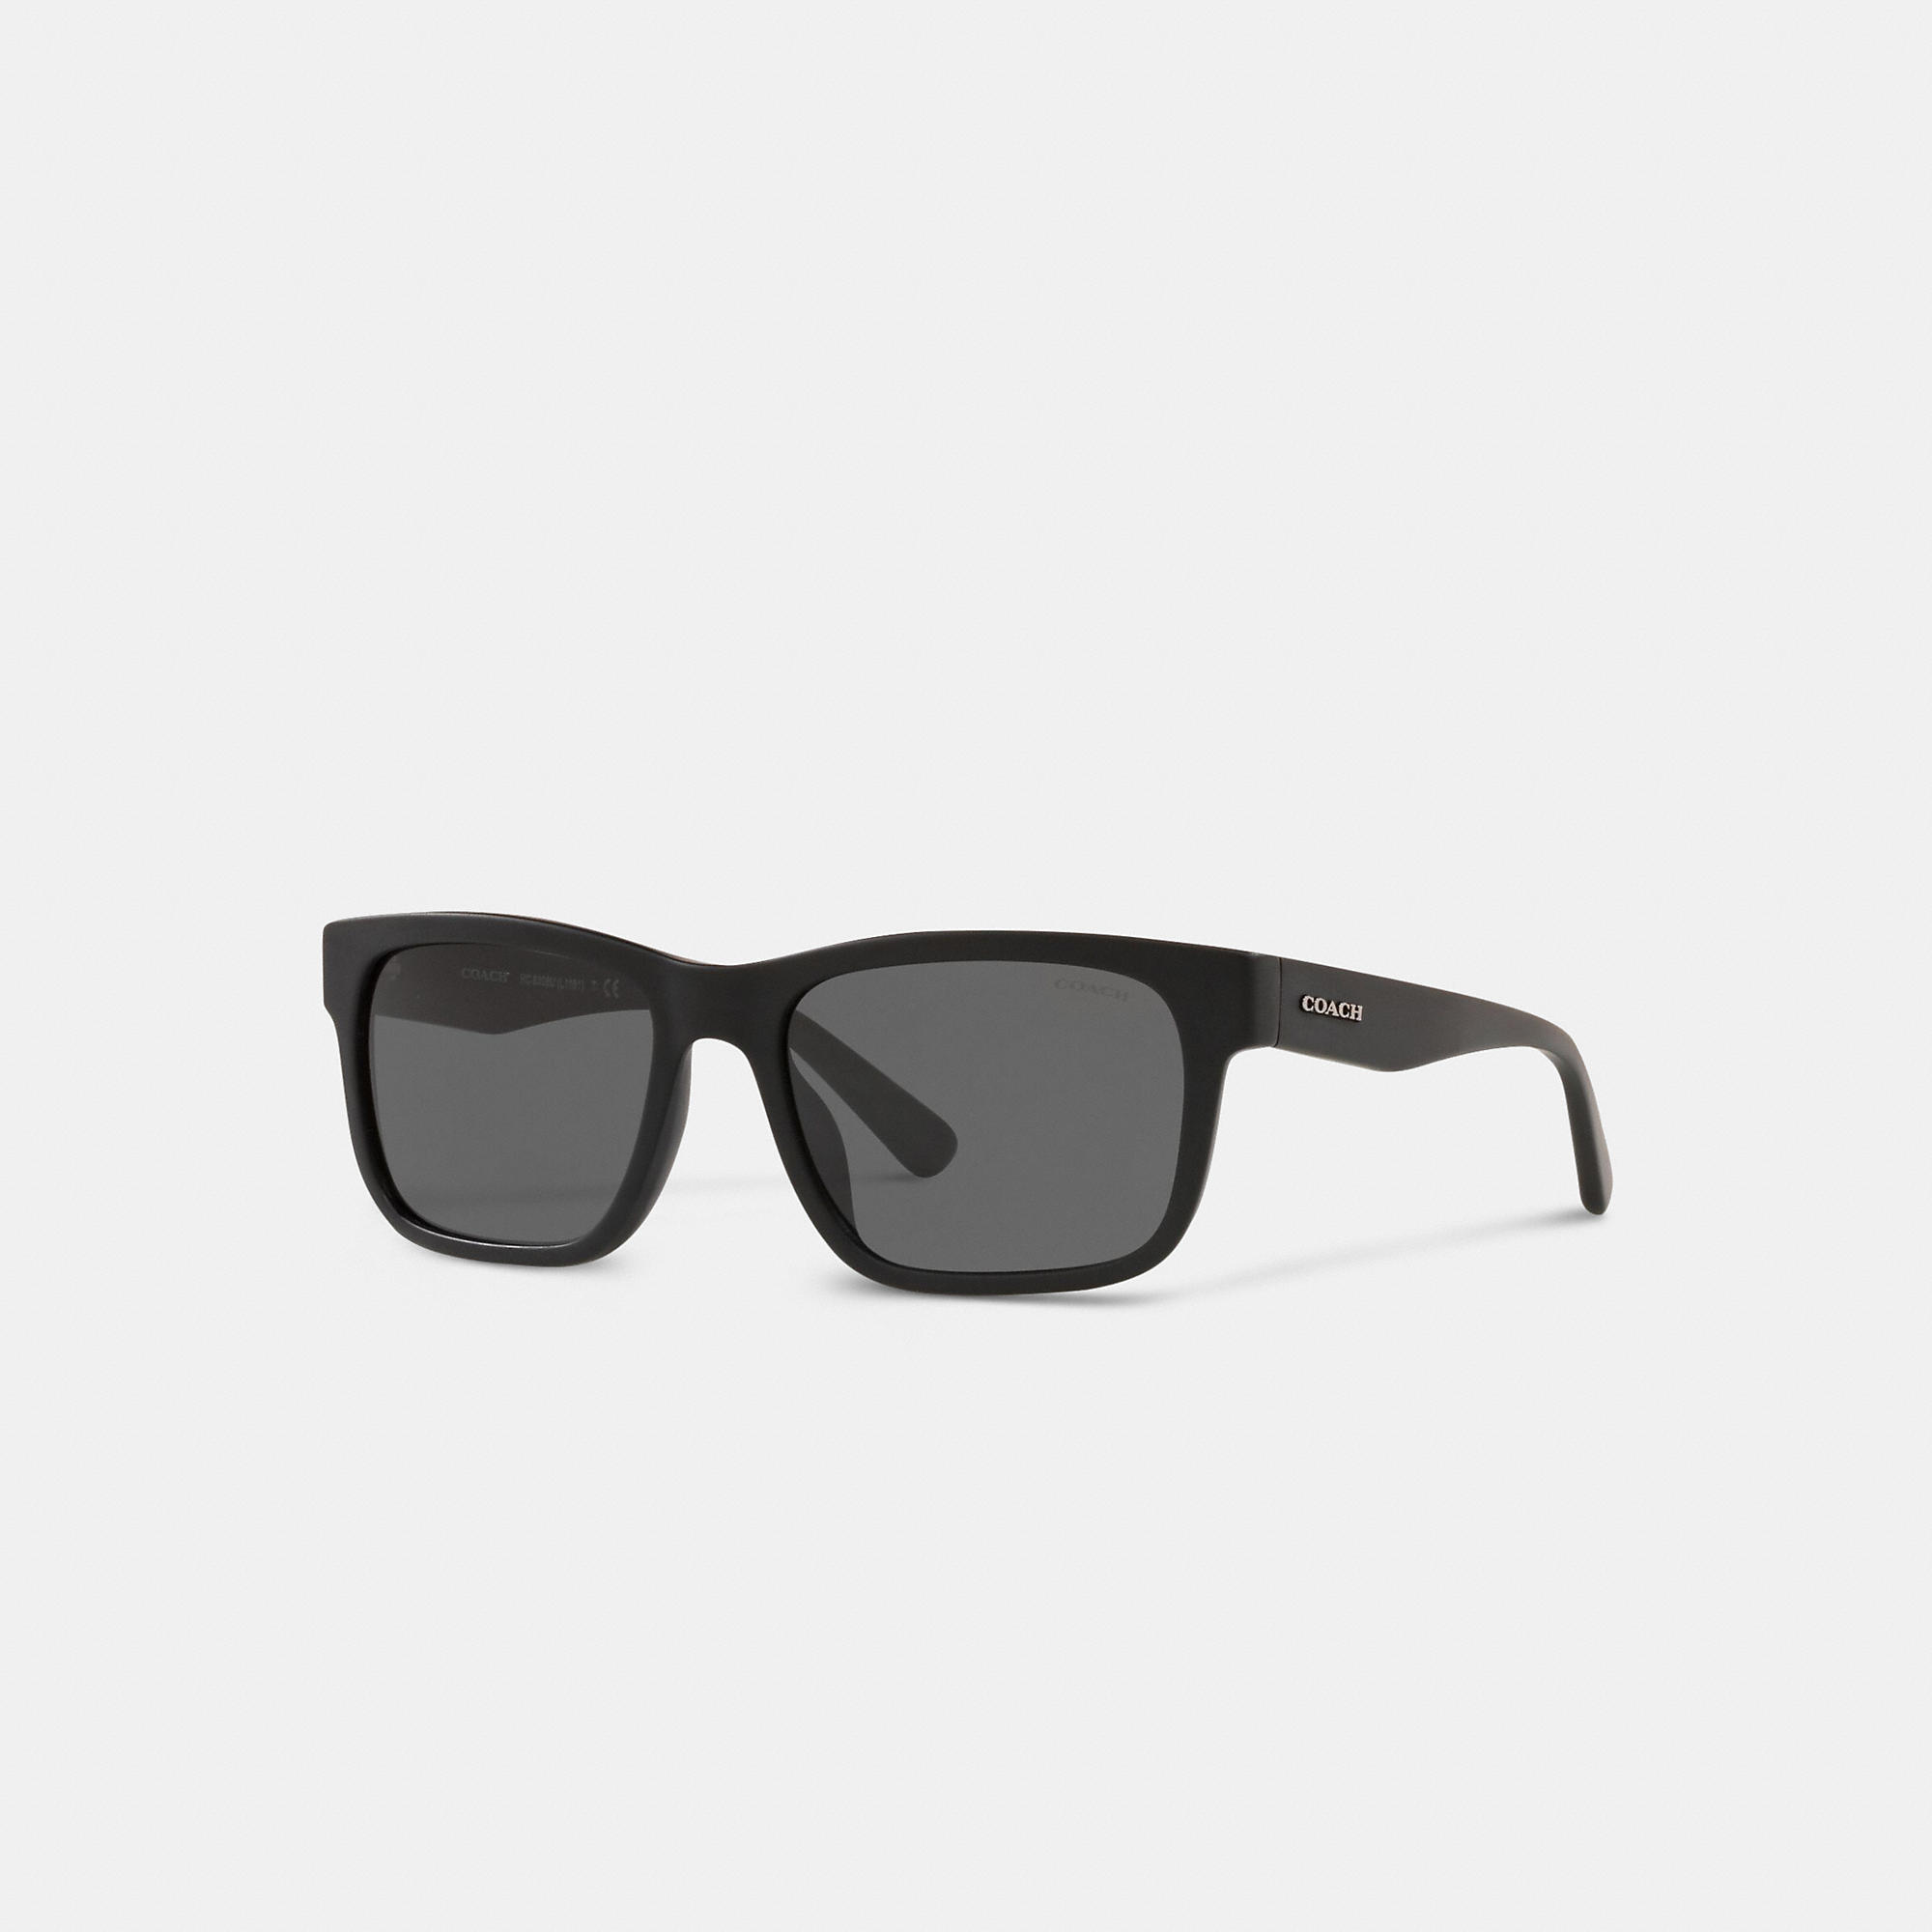 COACH OUTLET SQUARE FRAME SUNGLASSES